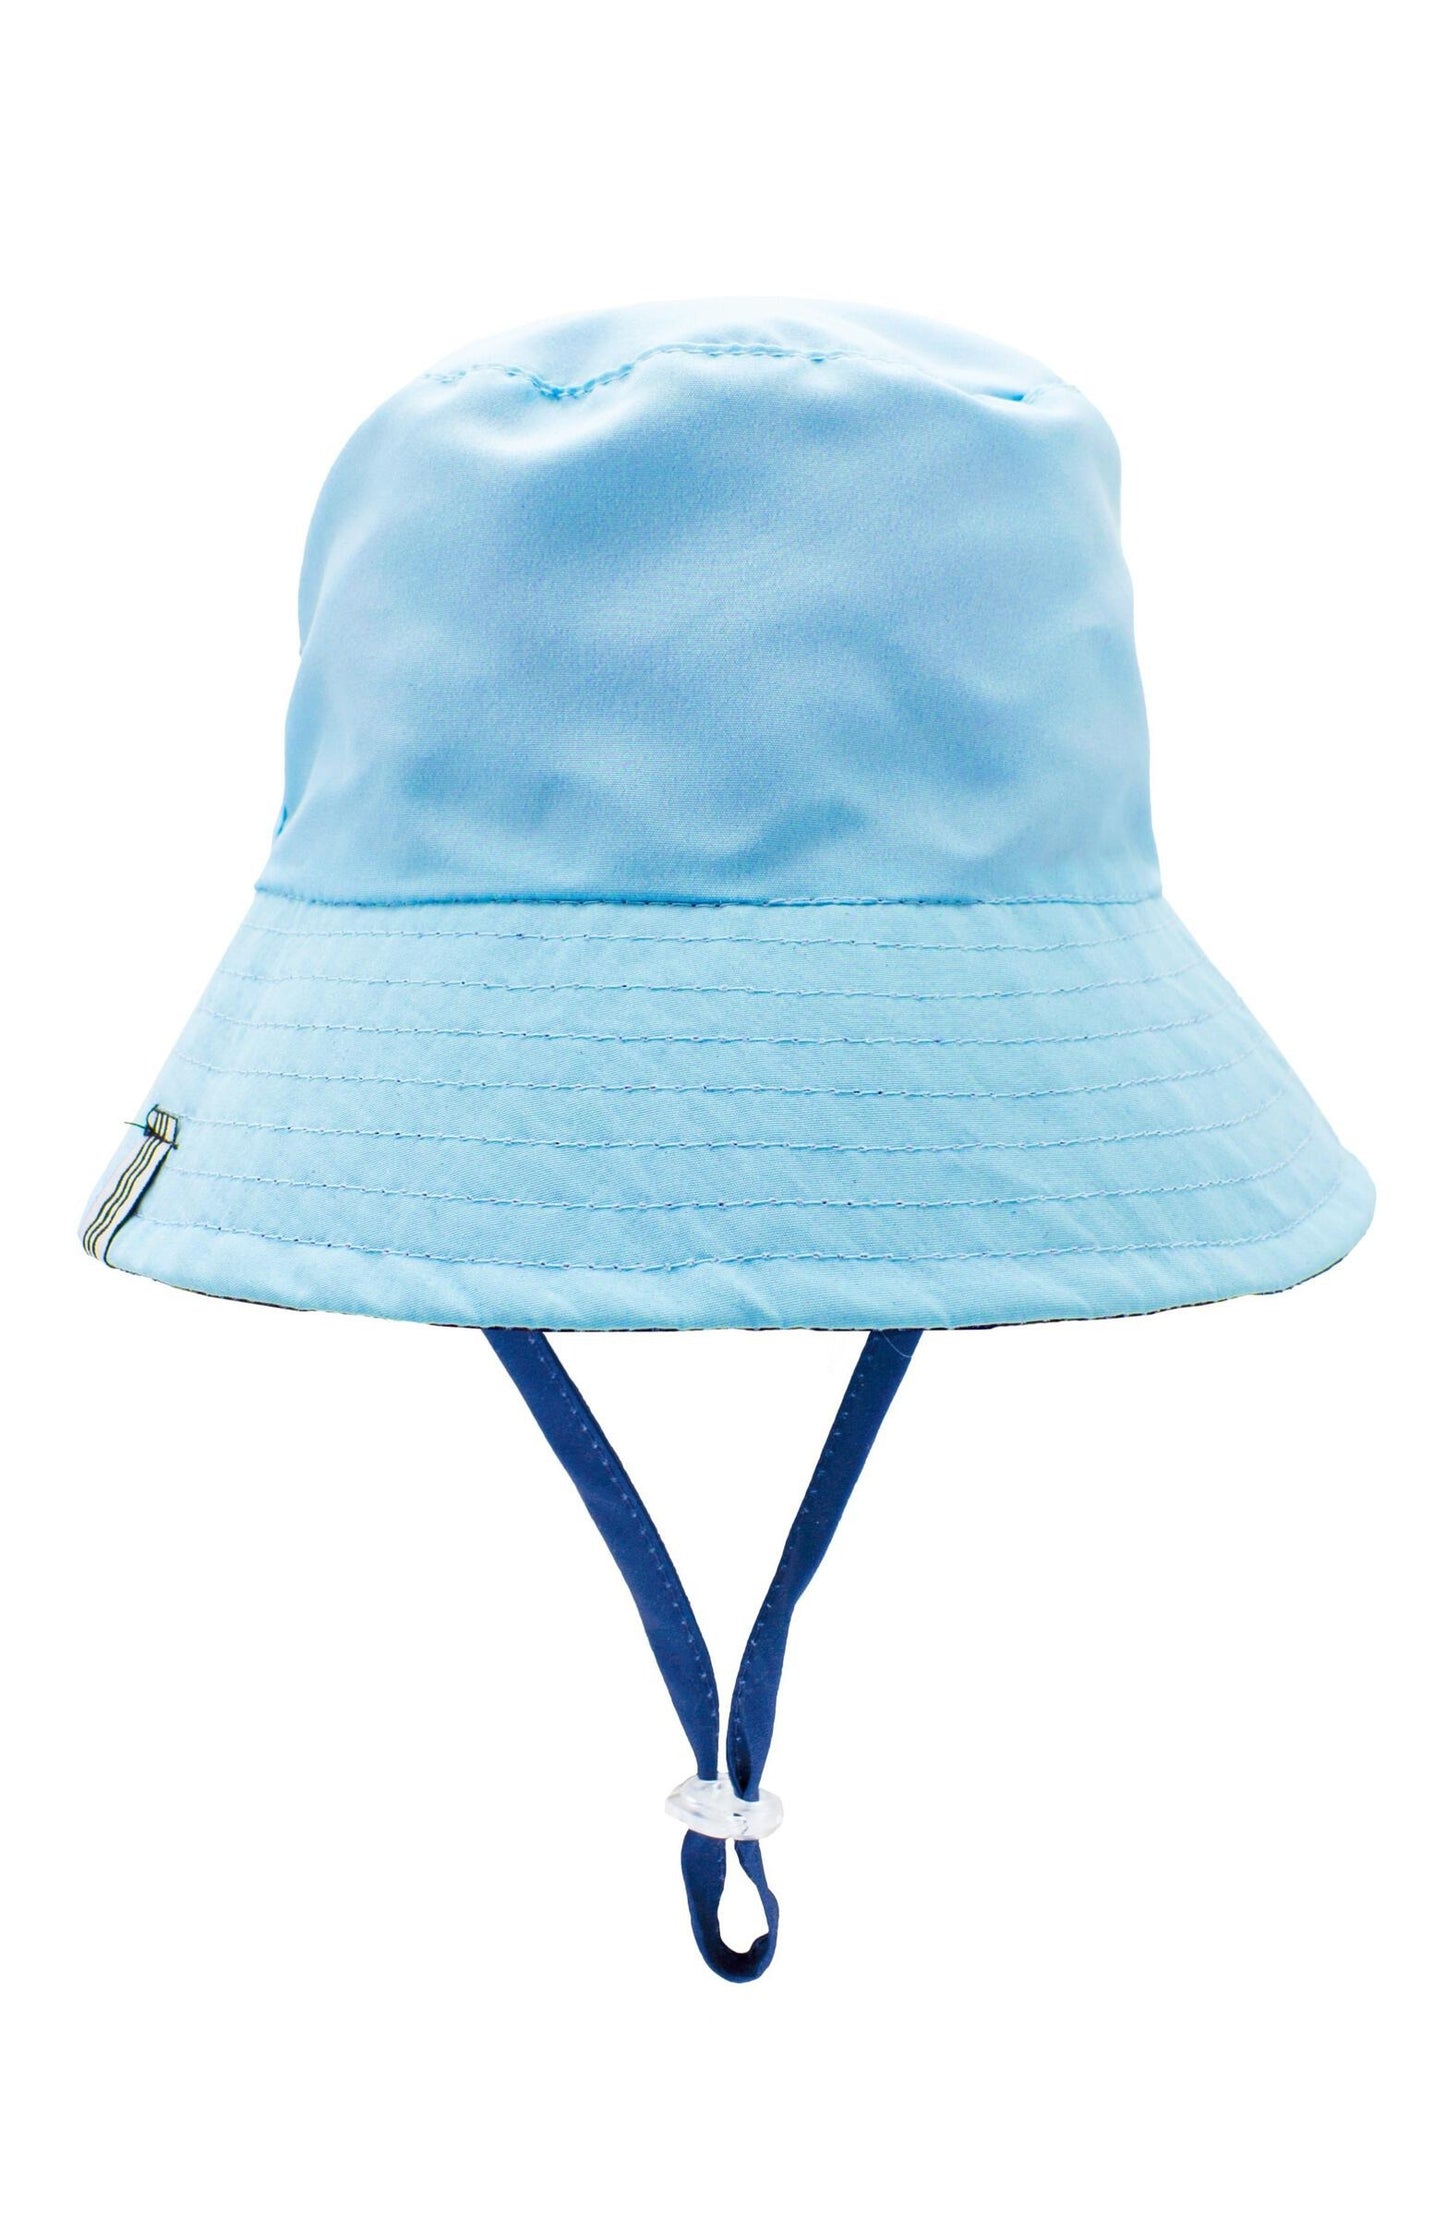 Suns Out Rev. Bucket Hat, Navy